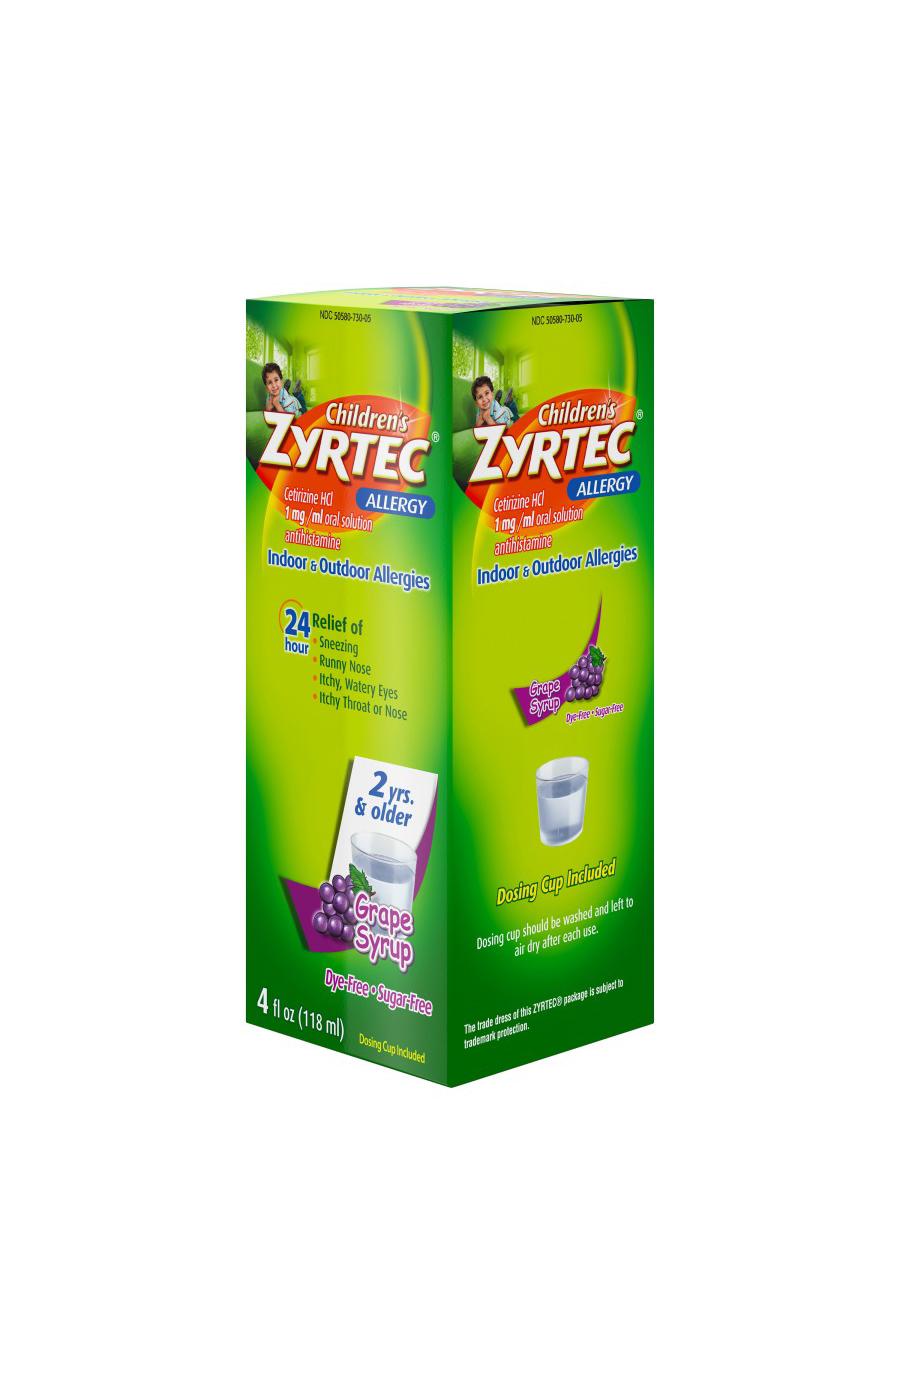 Zyrtec Children's Allergy Syrup - Grape; image 4 of 6